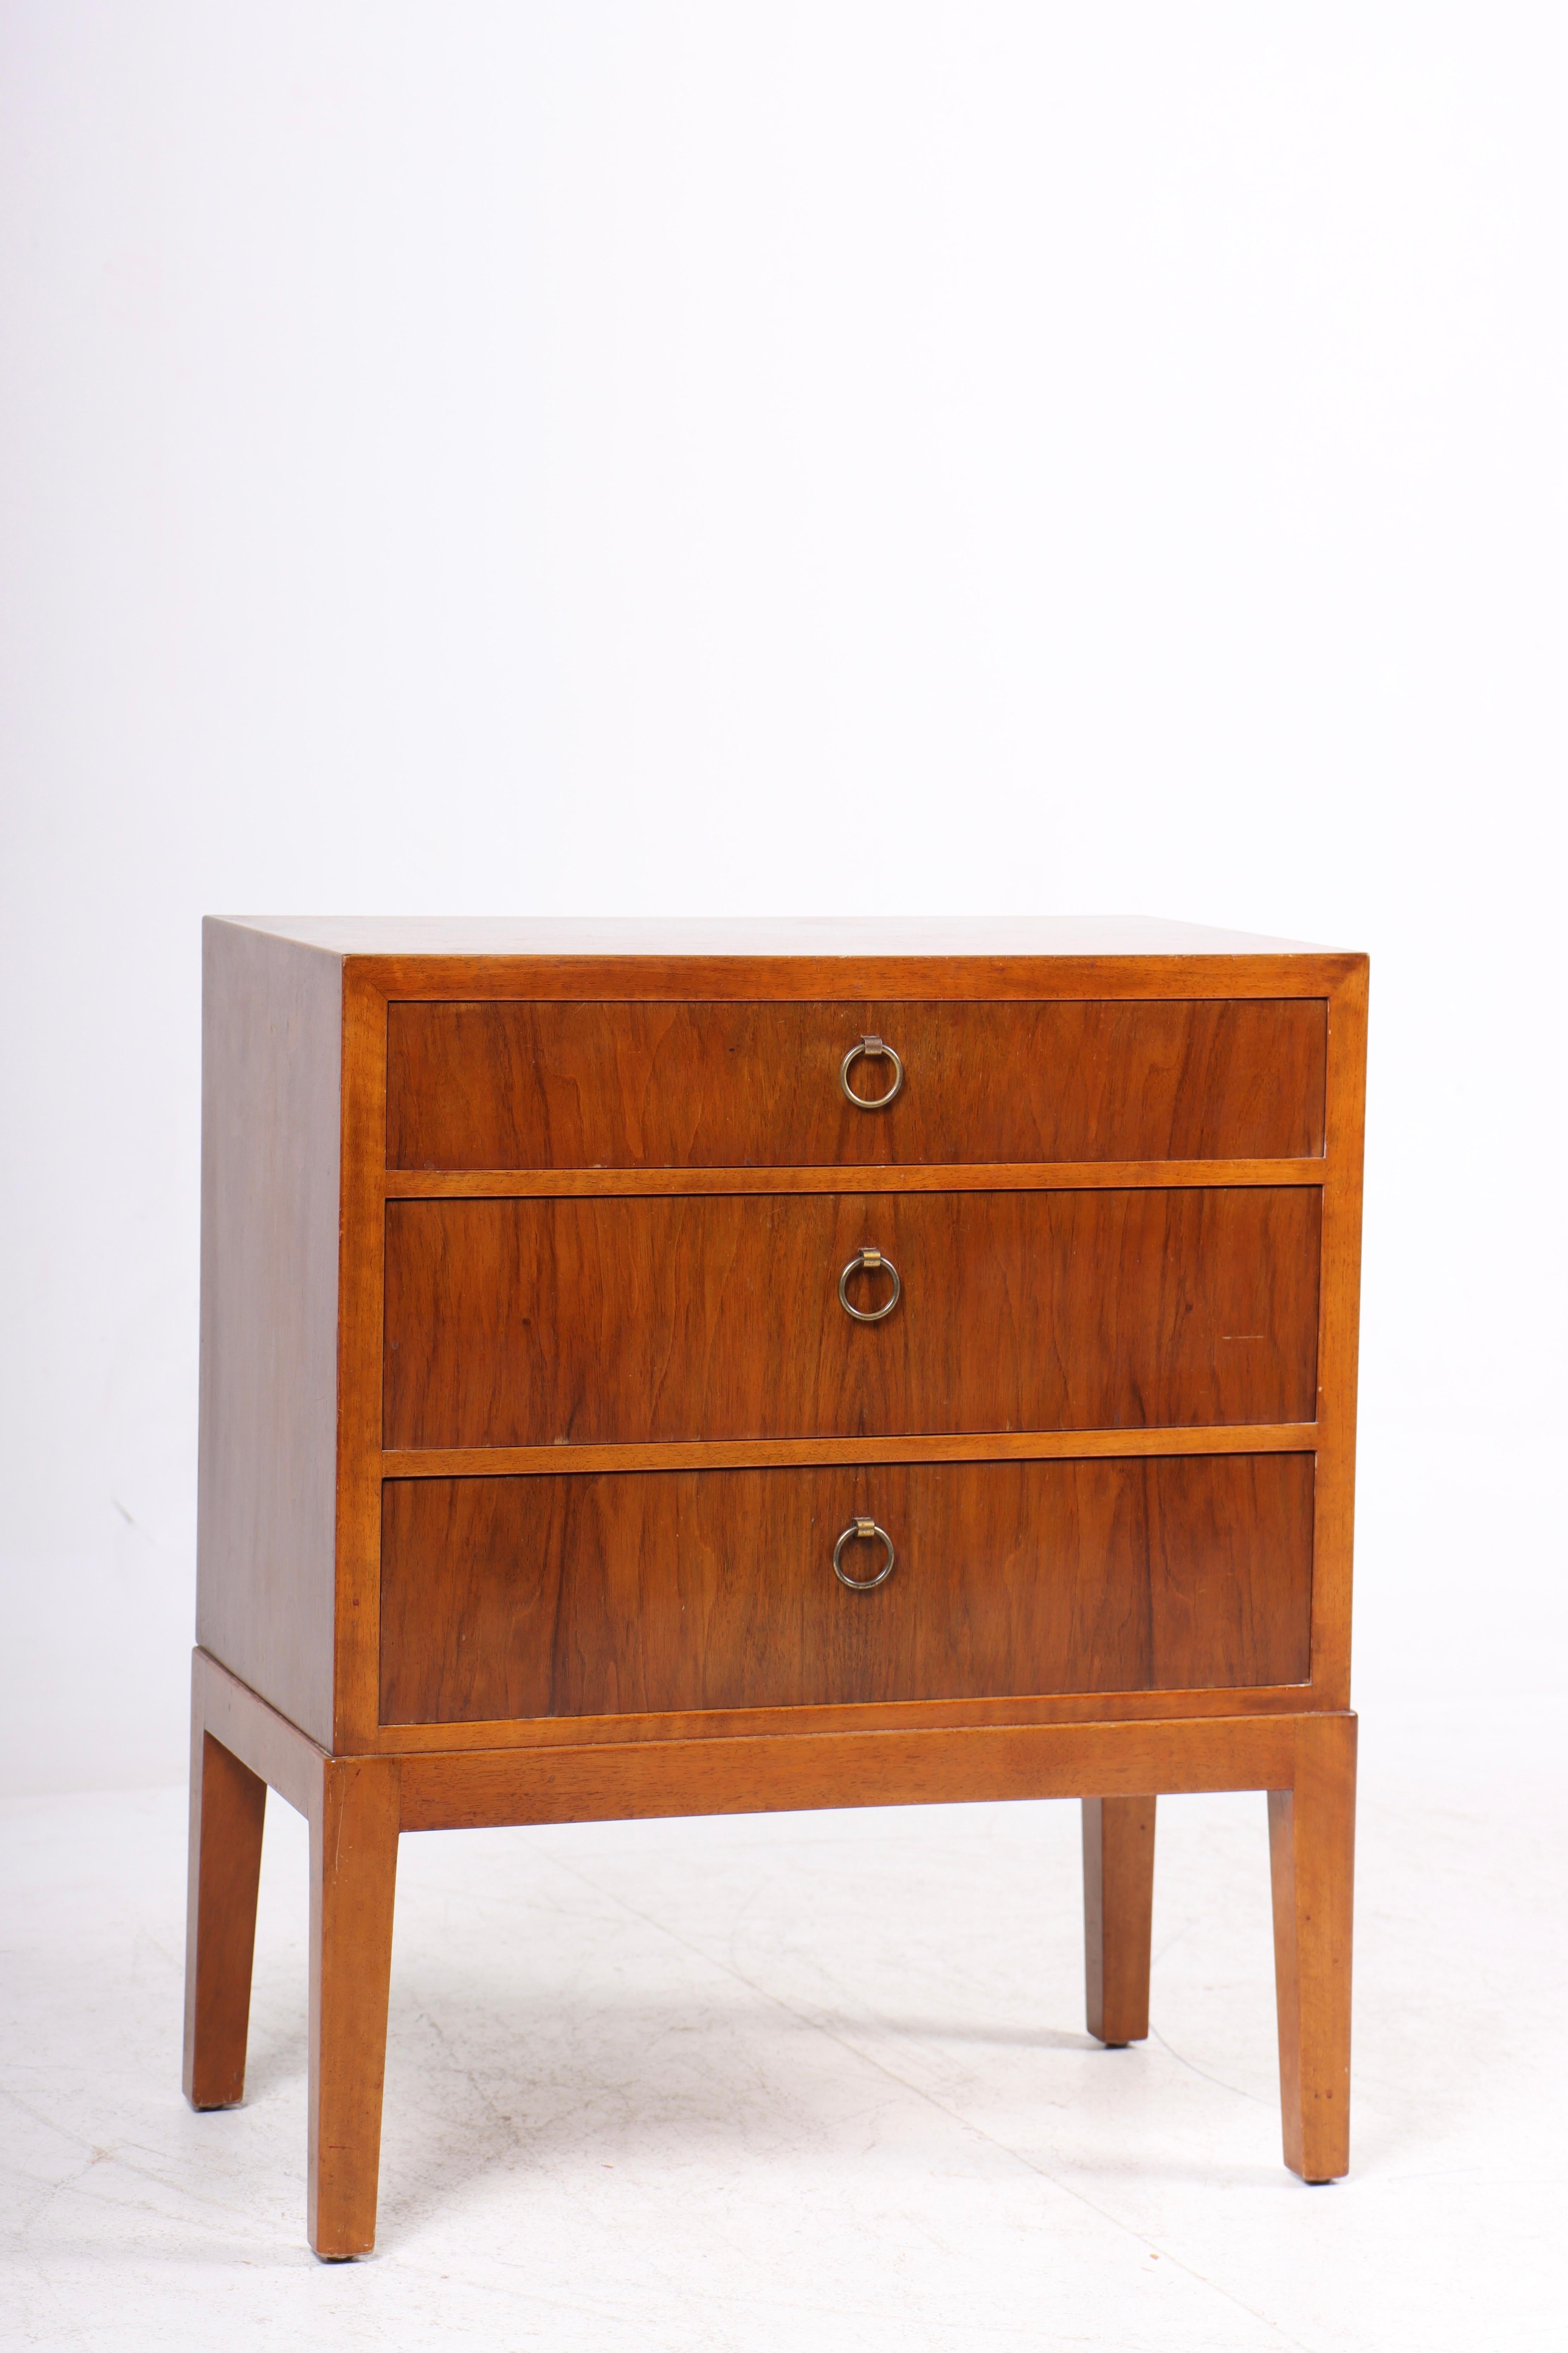 Midcentury Chest of Drawers by Thorald Madsen, Danish Design, 1950s In Good Condition For Sale In Lejre, DK